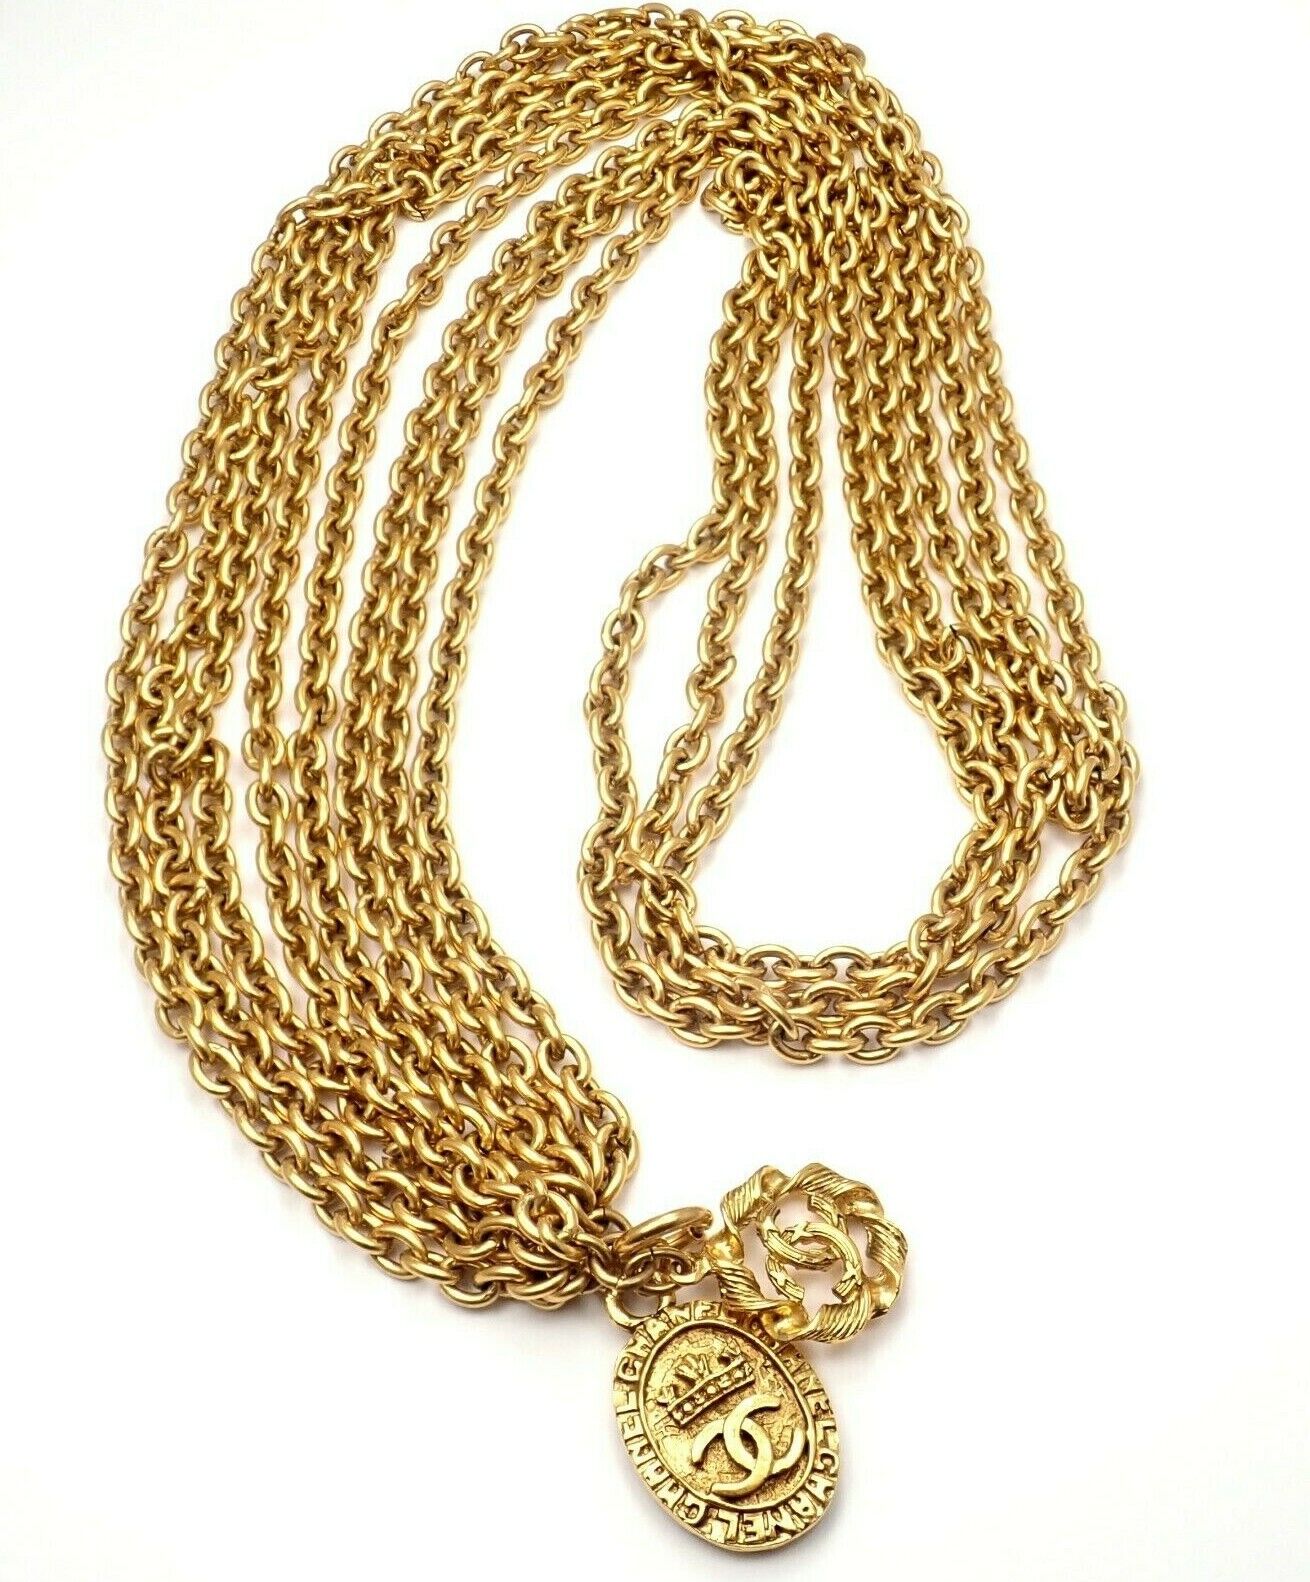 Chanel Jewelry & Watches:Fashion Jewelry:Necklaces & Pendants Amazing Authentic Chanel Gold Tone 3 Row Draped Clasp Belt Necklace 34"